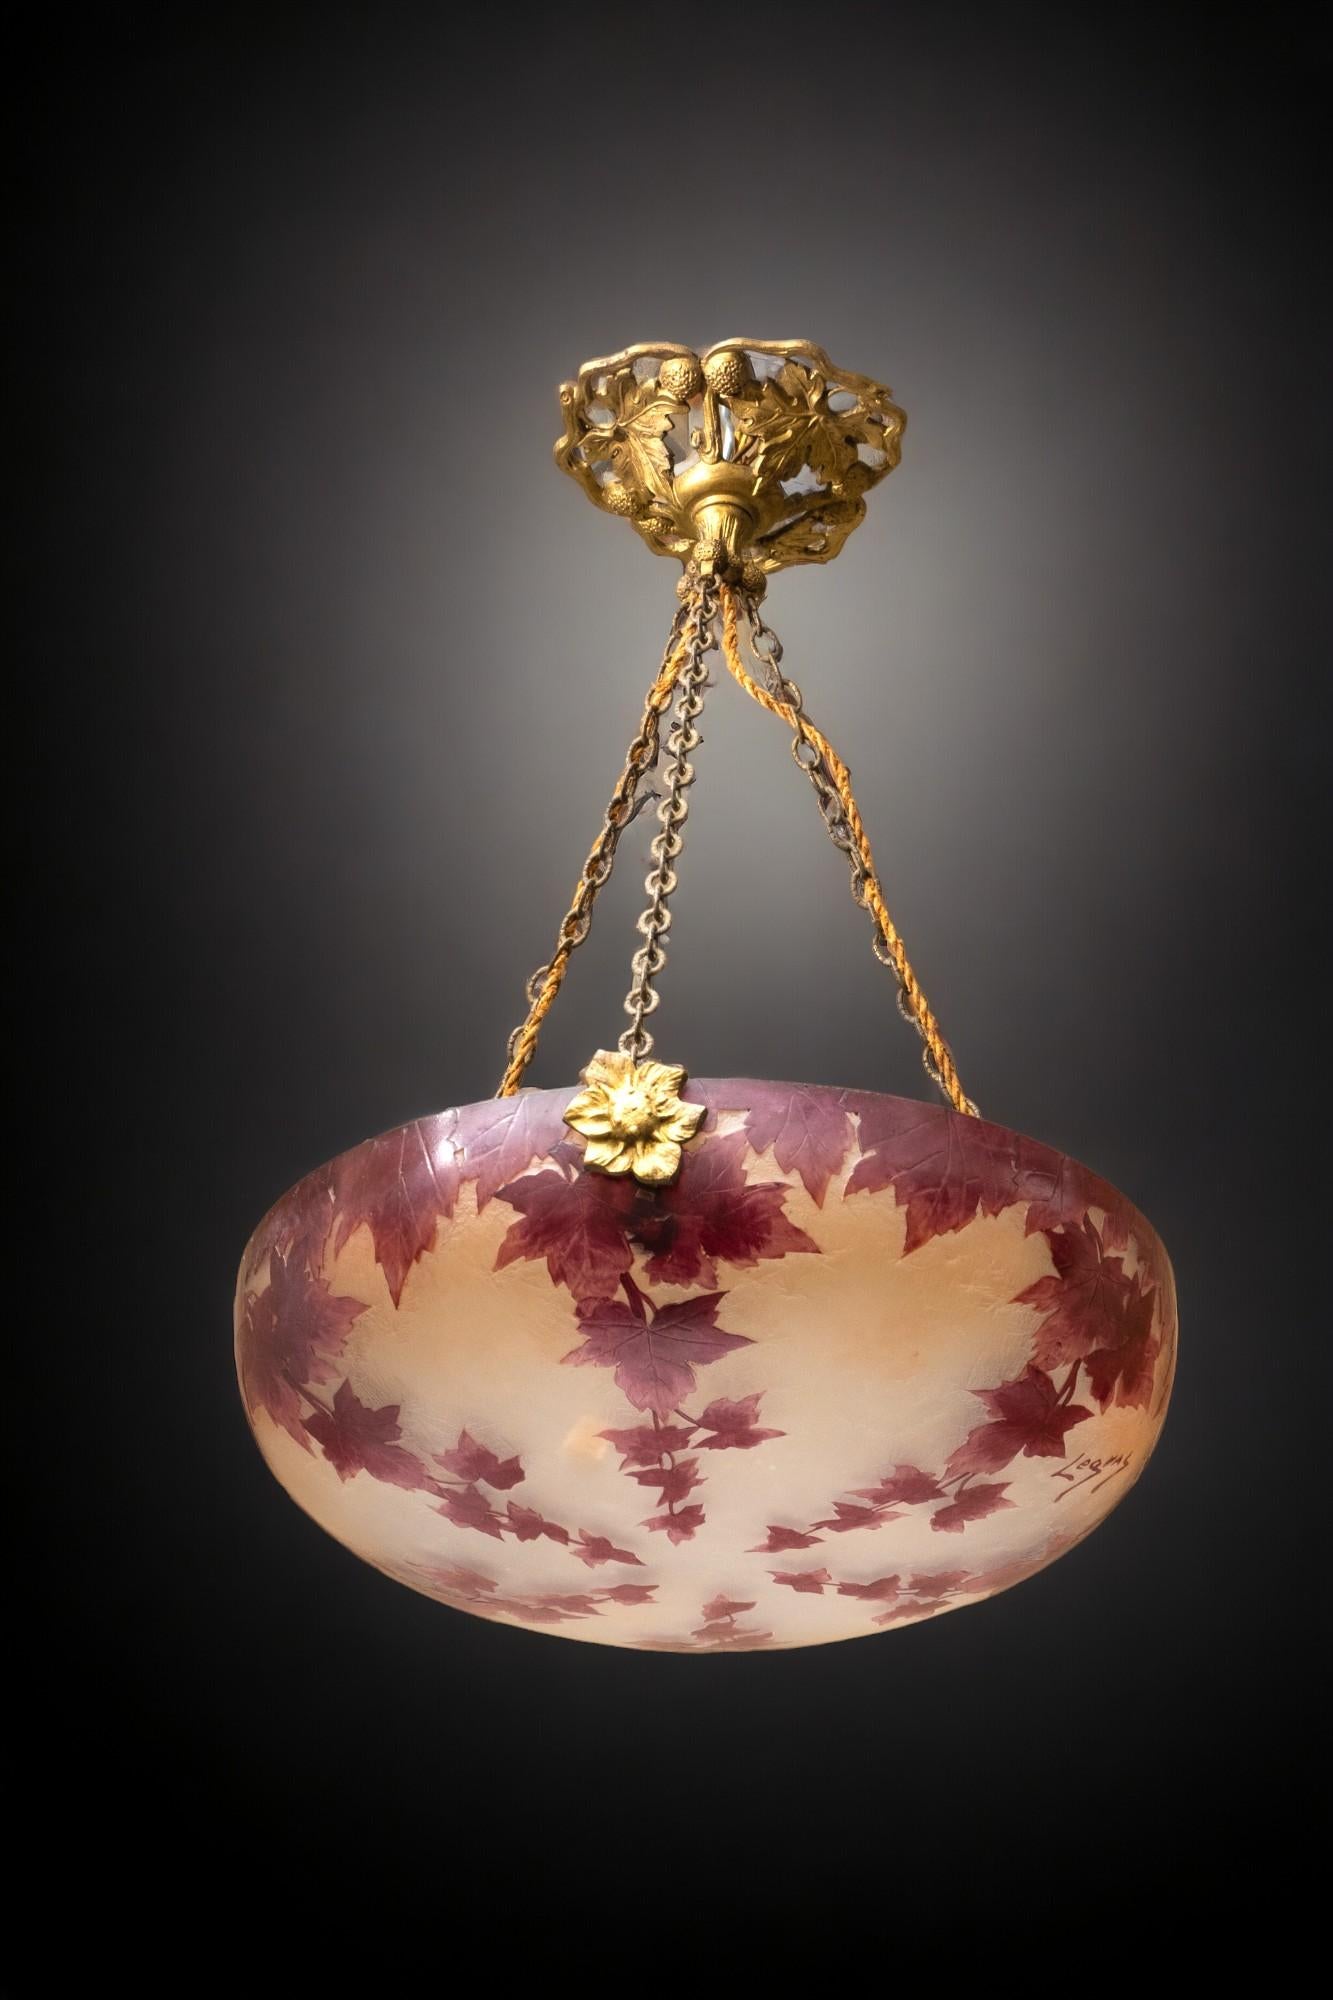 Signed Legras Cameo Art Glass Hanging Ceiling fixture with bronze mountings circa 1920